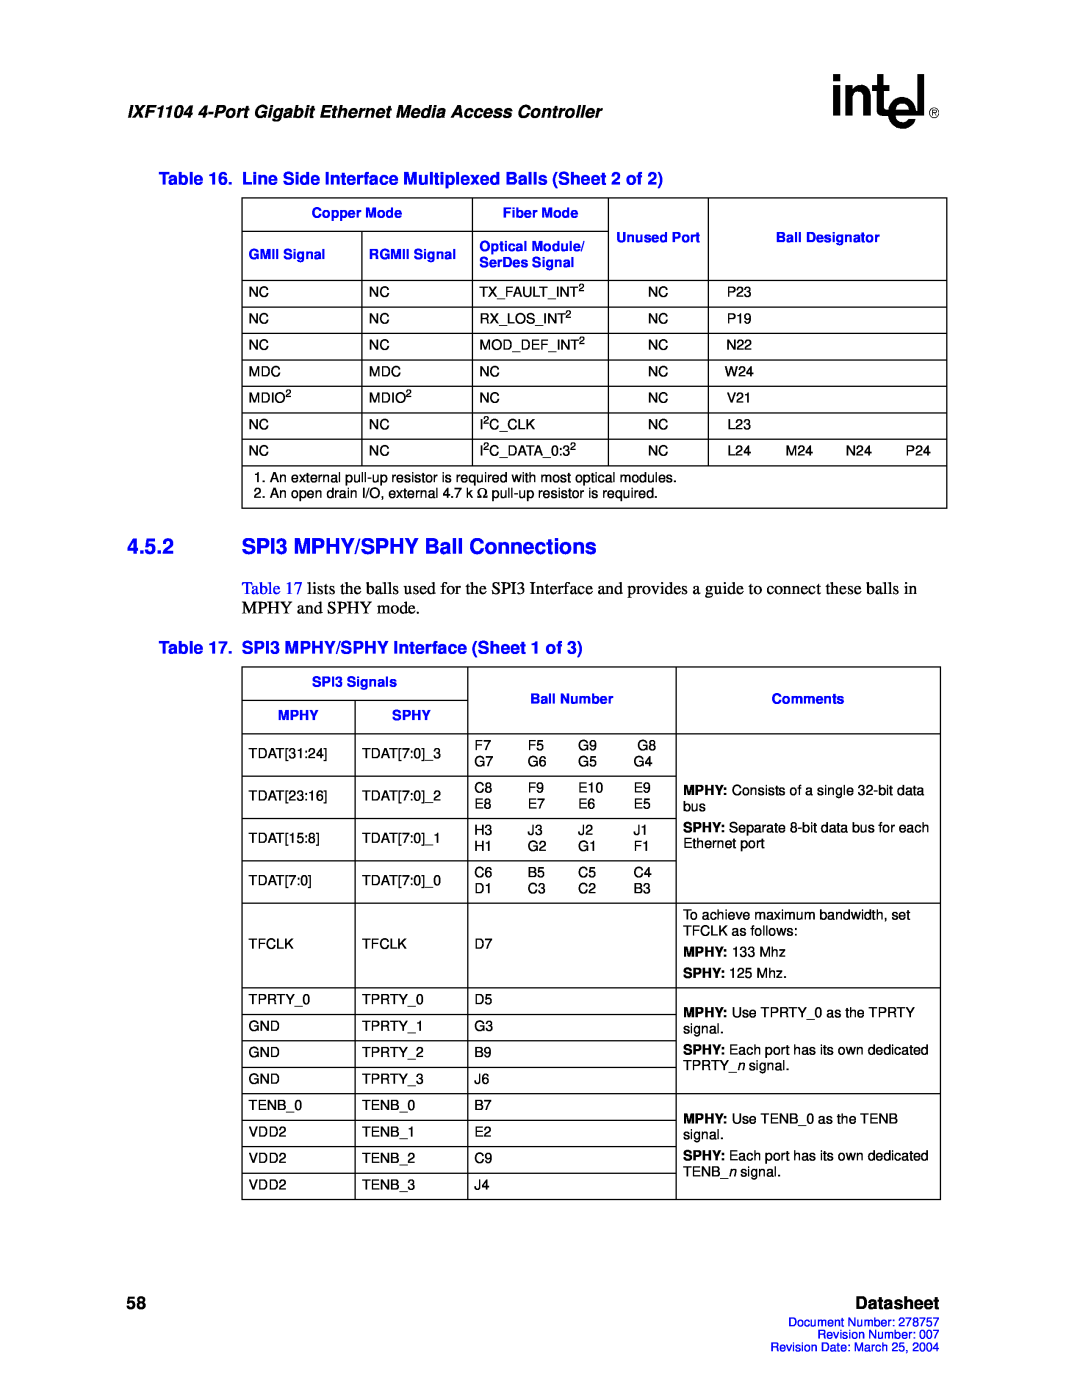 Intel IXF1104 manual 4.5.2SPI3 MPHY/SPHY Ball Connections, Datasheet 